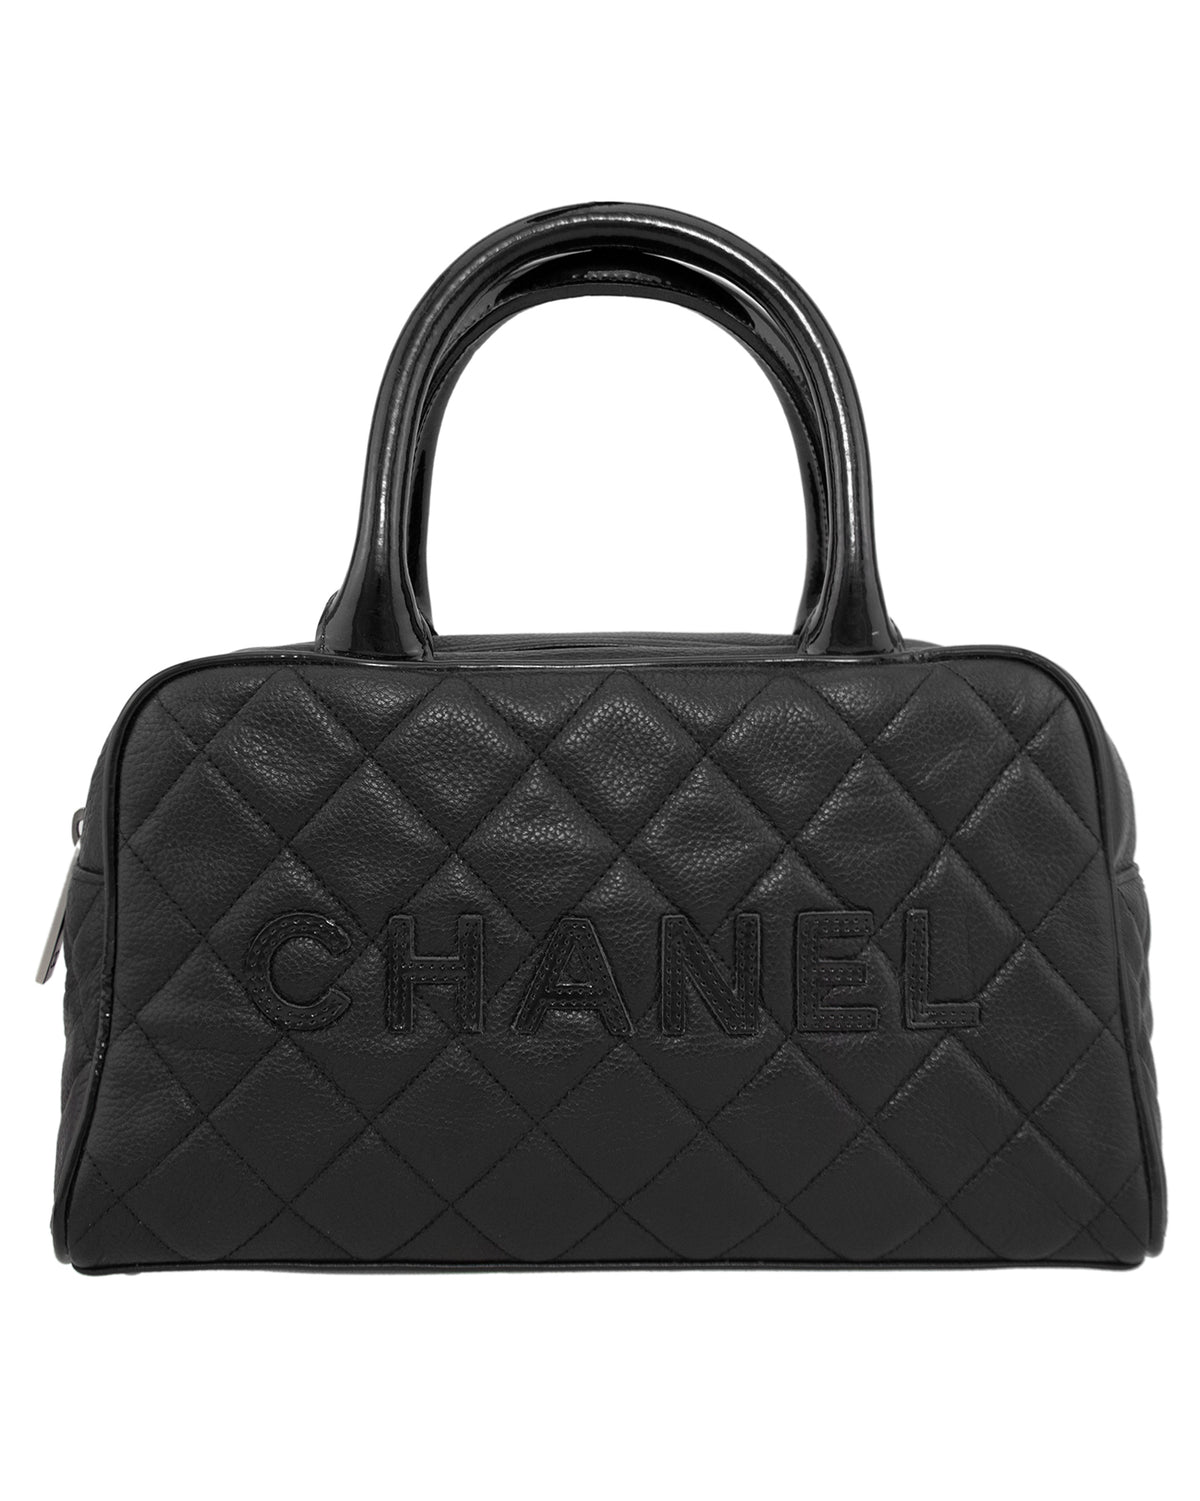 Chanel Black Chevron Quilted Leather Coco Waist Belt Bag